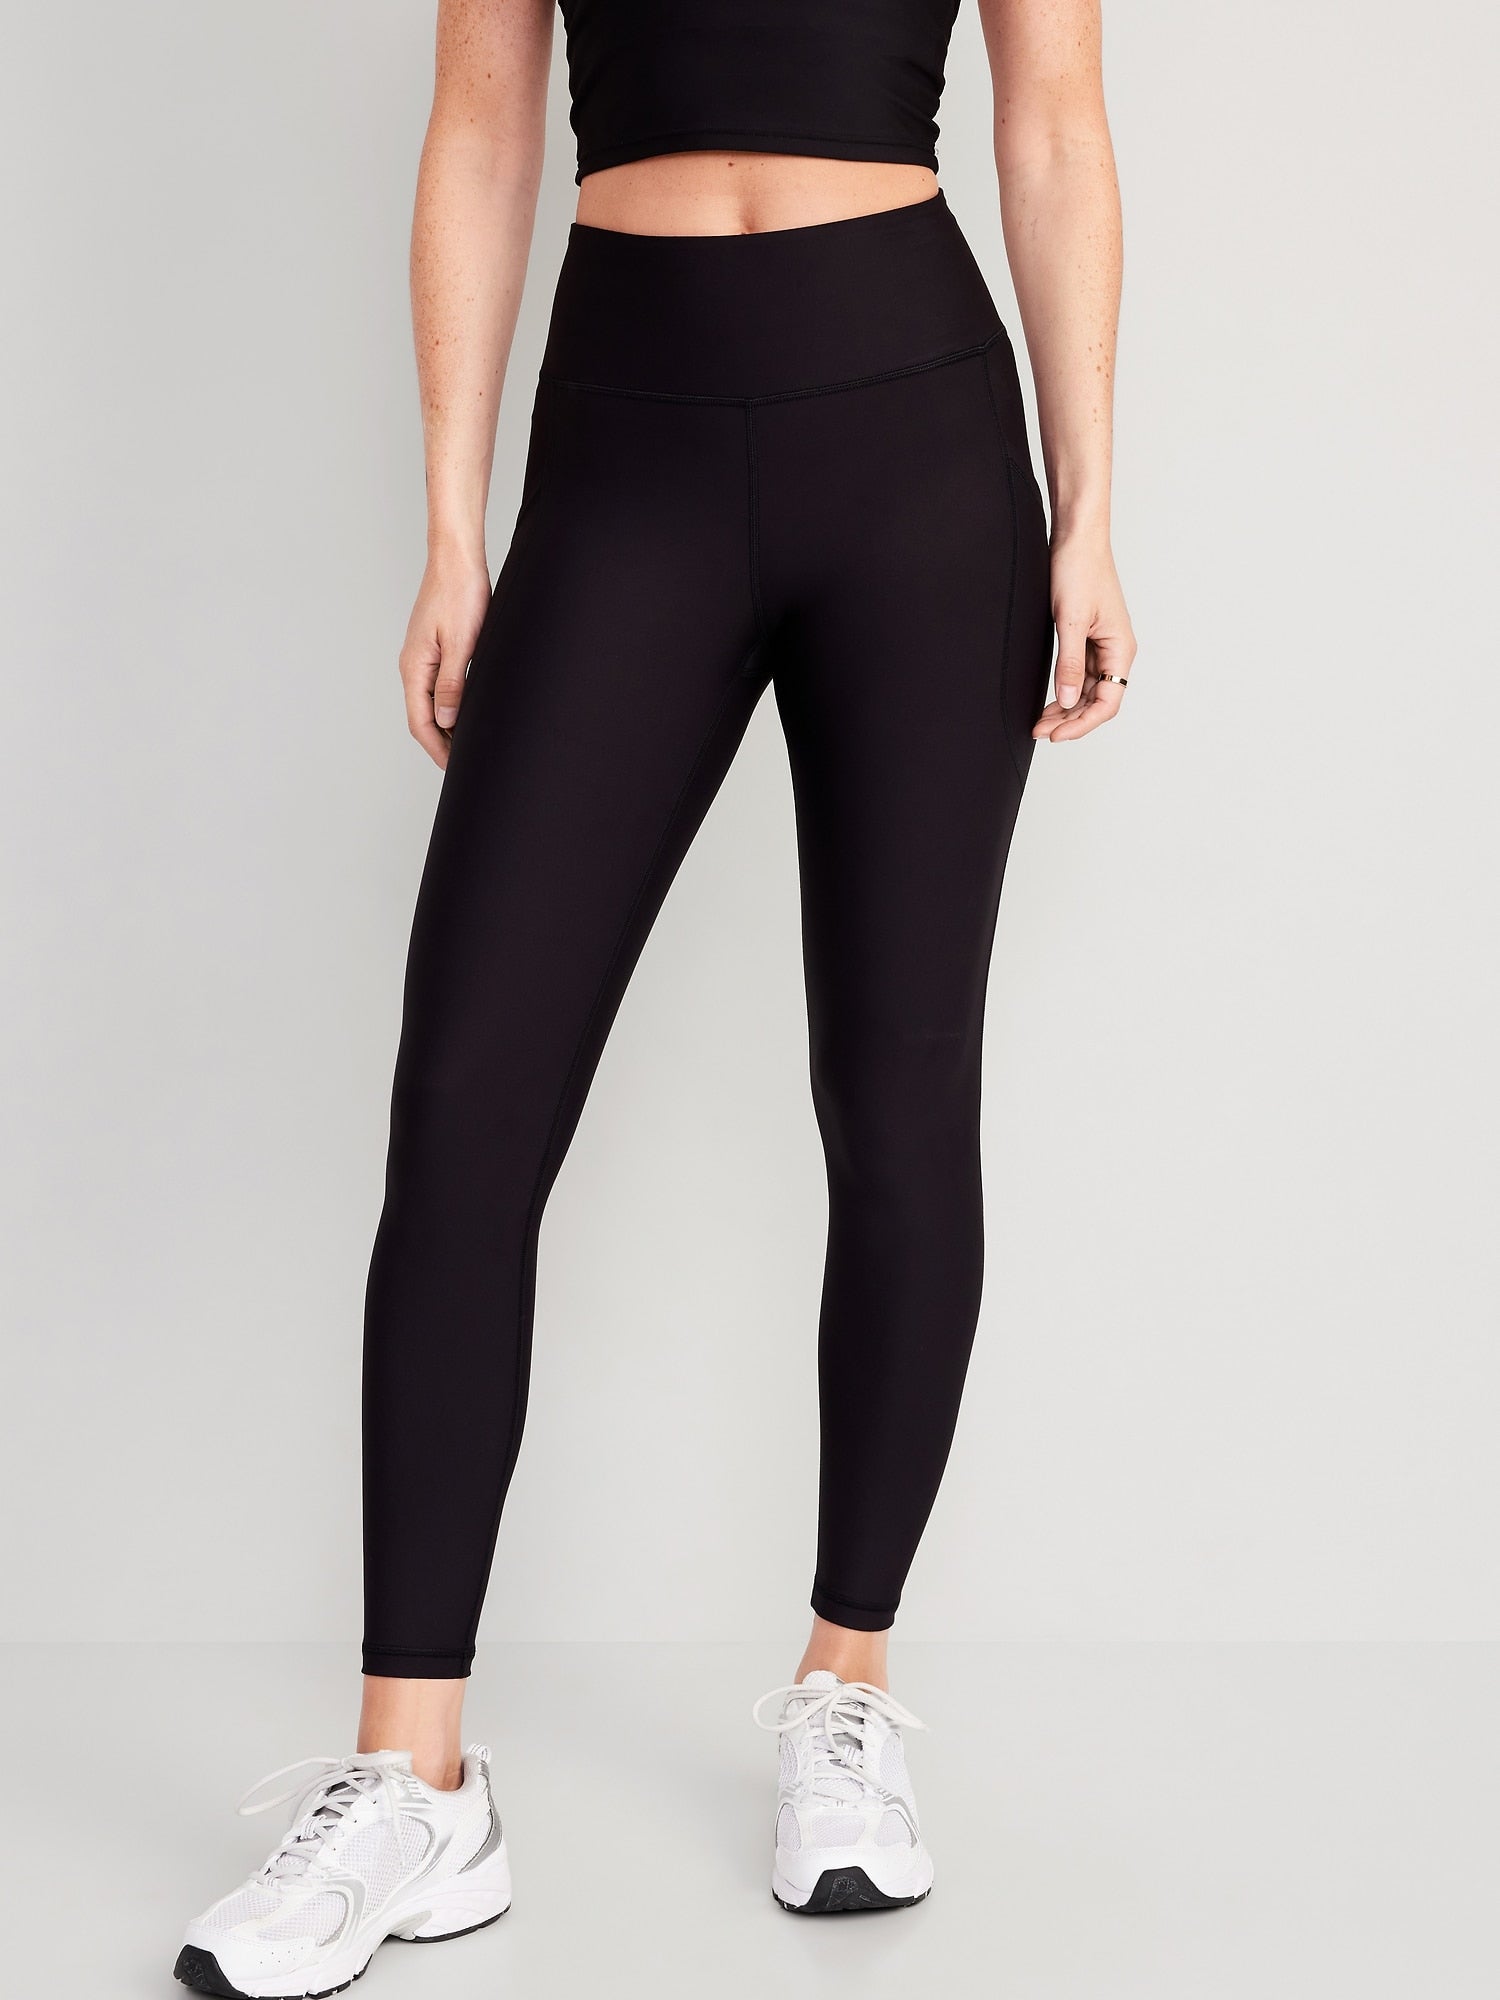 Women's Leggings Tagged Black - Old Navy Philippines